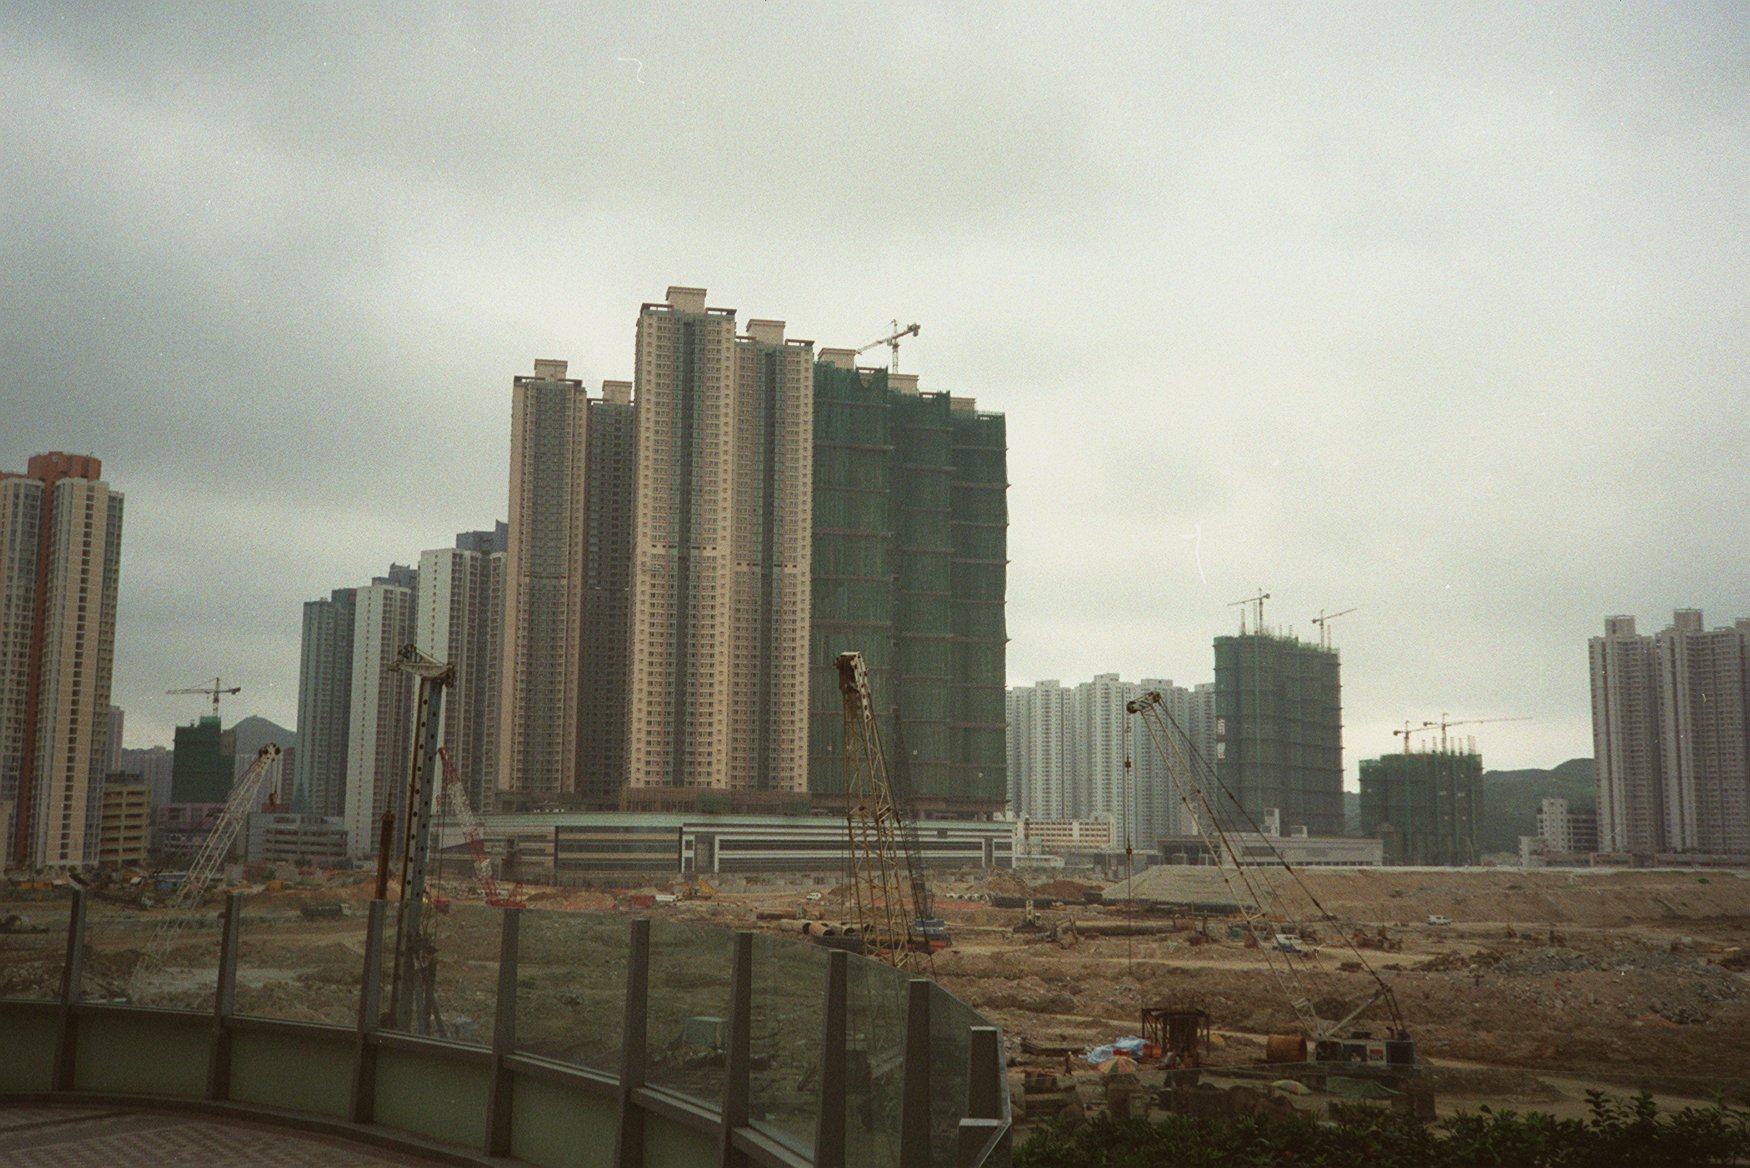 Construction work in 2002 in Tseung Kwan O, the year Li Suet-ping, 50, murdered her husband in the Hong Kong residential district by stabbing him multiple times and pouring boiling oil over him. Photo: Kenneth Ko